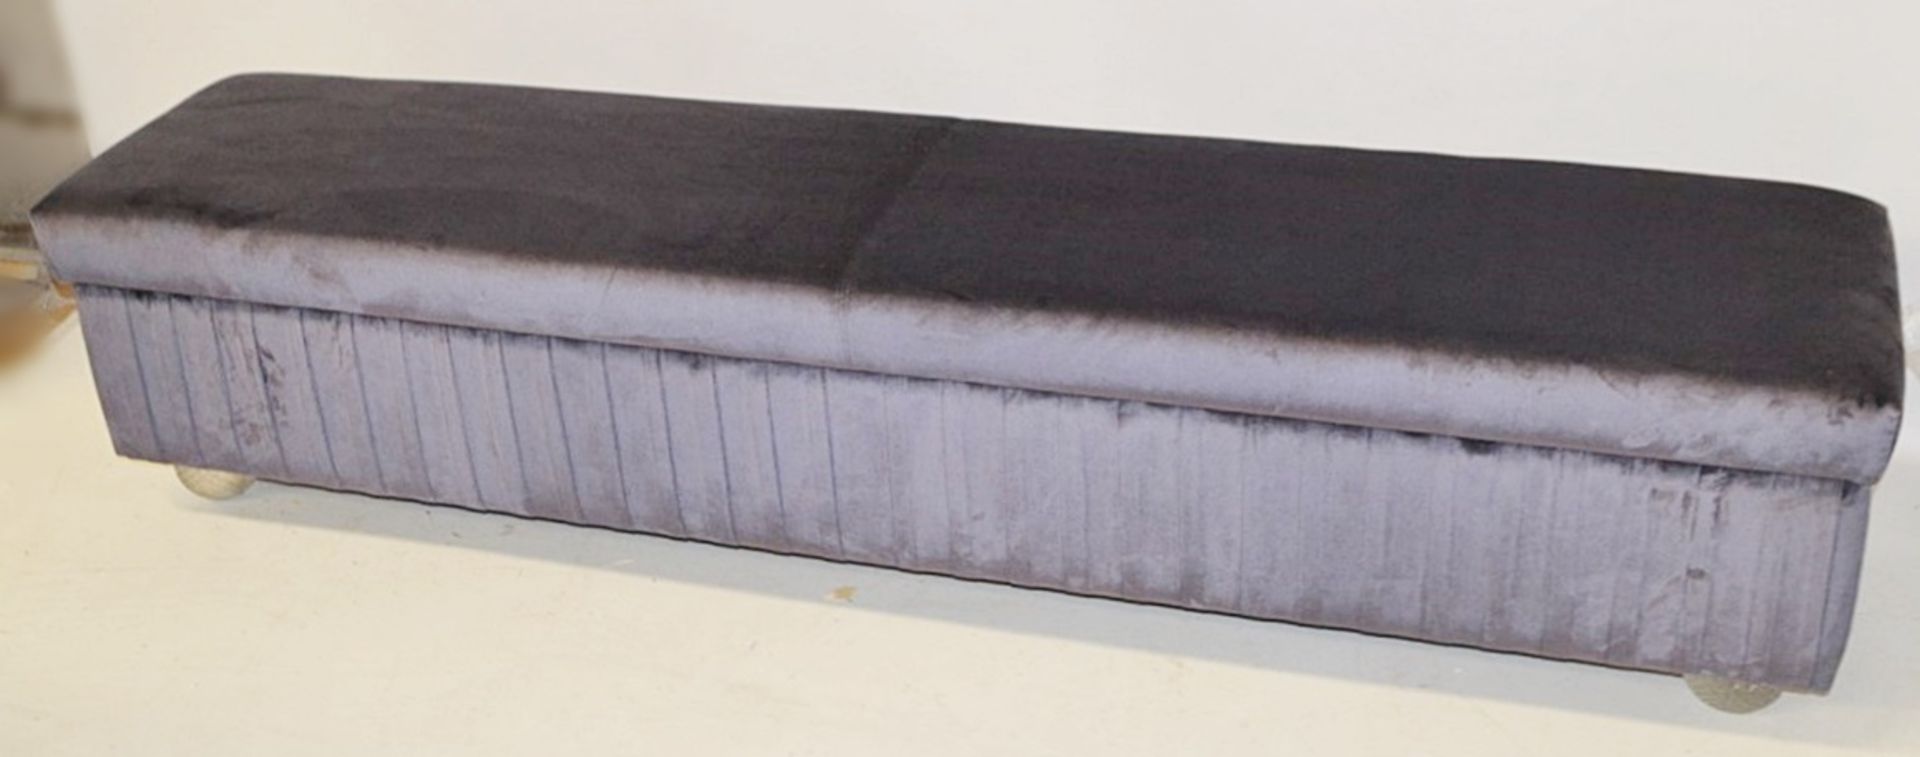 1 x REFLEX 'Plisse' Pleated Ottoman / Bedroom Bench In Plum With 'Illuminated' Spherical Glass Feet - Image 11 of 11